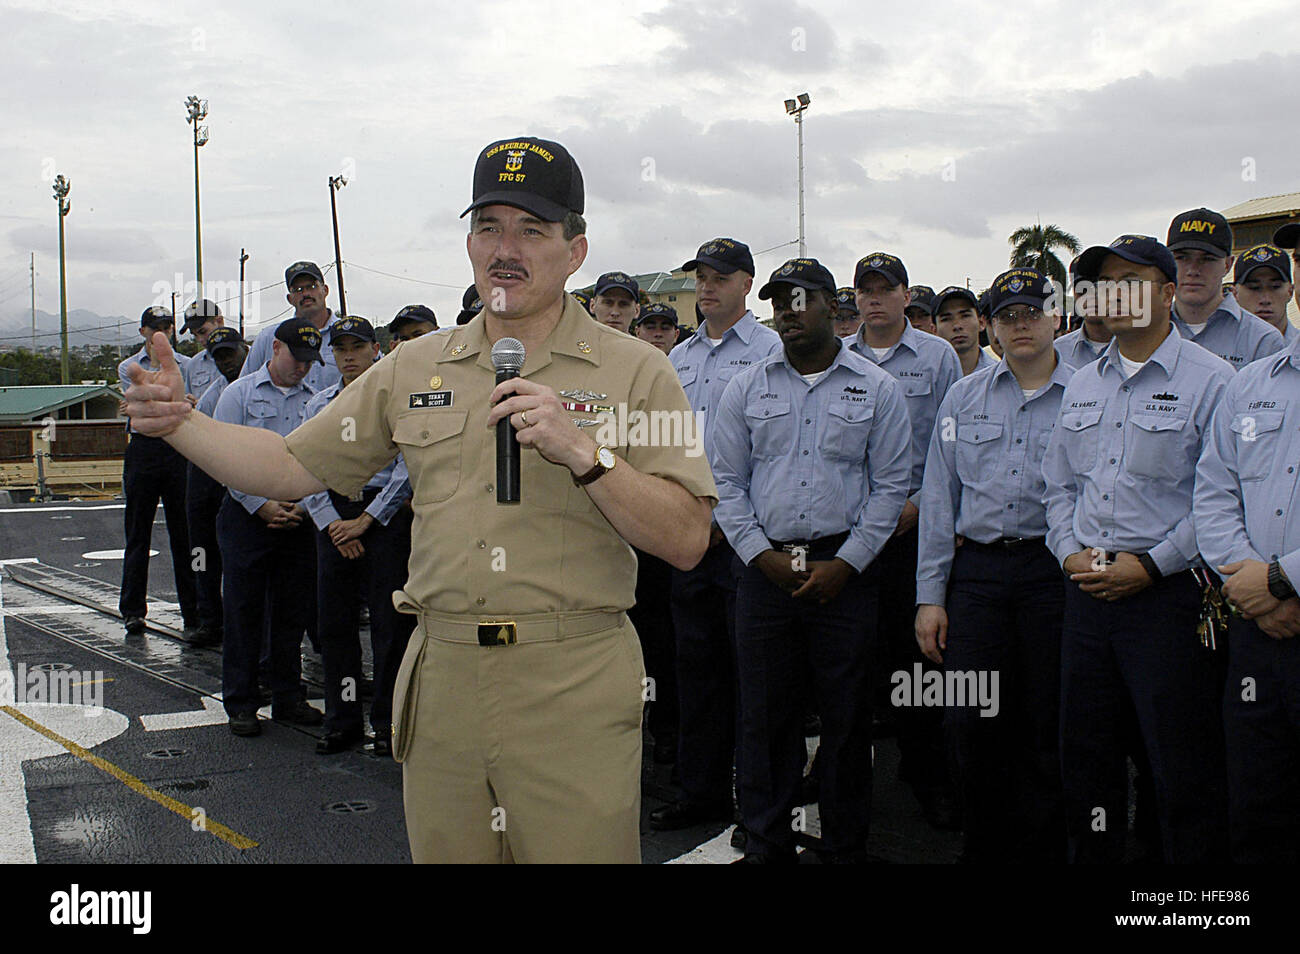 050131-N-3207B-099 Pearl Harbor, Hawaii (Jan. 31, 2005) - - Master Chief Petty Officer of the Navy (MCPON) Terry Scott speaks to Sailors assigned to the guided missile frigate USS Reuben James (FFG 57) about how fleet surveys affected the concept of the new Task Force Uniform. MCPON Terry Scott visited various bases in Hawaii to speak to Sailors about education, training, and the new Task Force Uniform concept. U.S. Navy photo by Photographer's Mate 2nd Class Jennifer L. Bailey (RELEASED) US Navy 050131-N-3207B-099 Master Chief Petty Officer of the Navy (MCPON) Terry Scott speaks to Sailors as Stock Photo